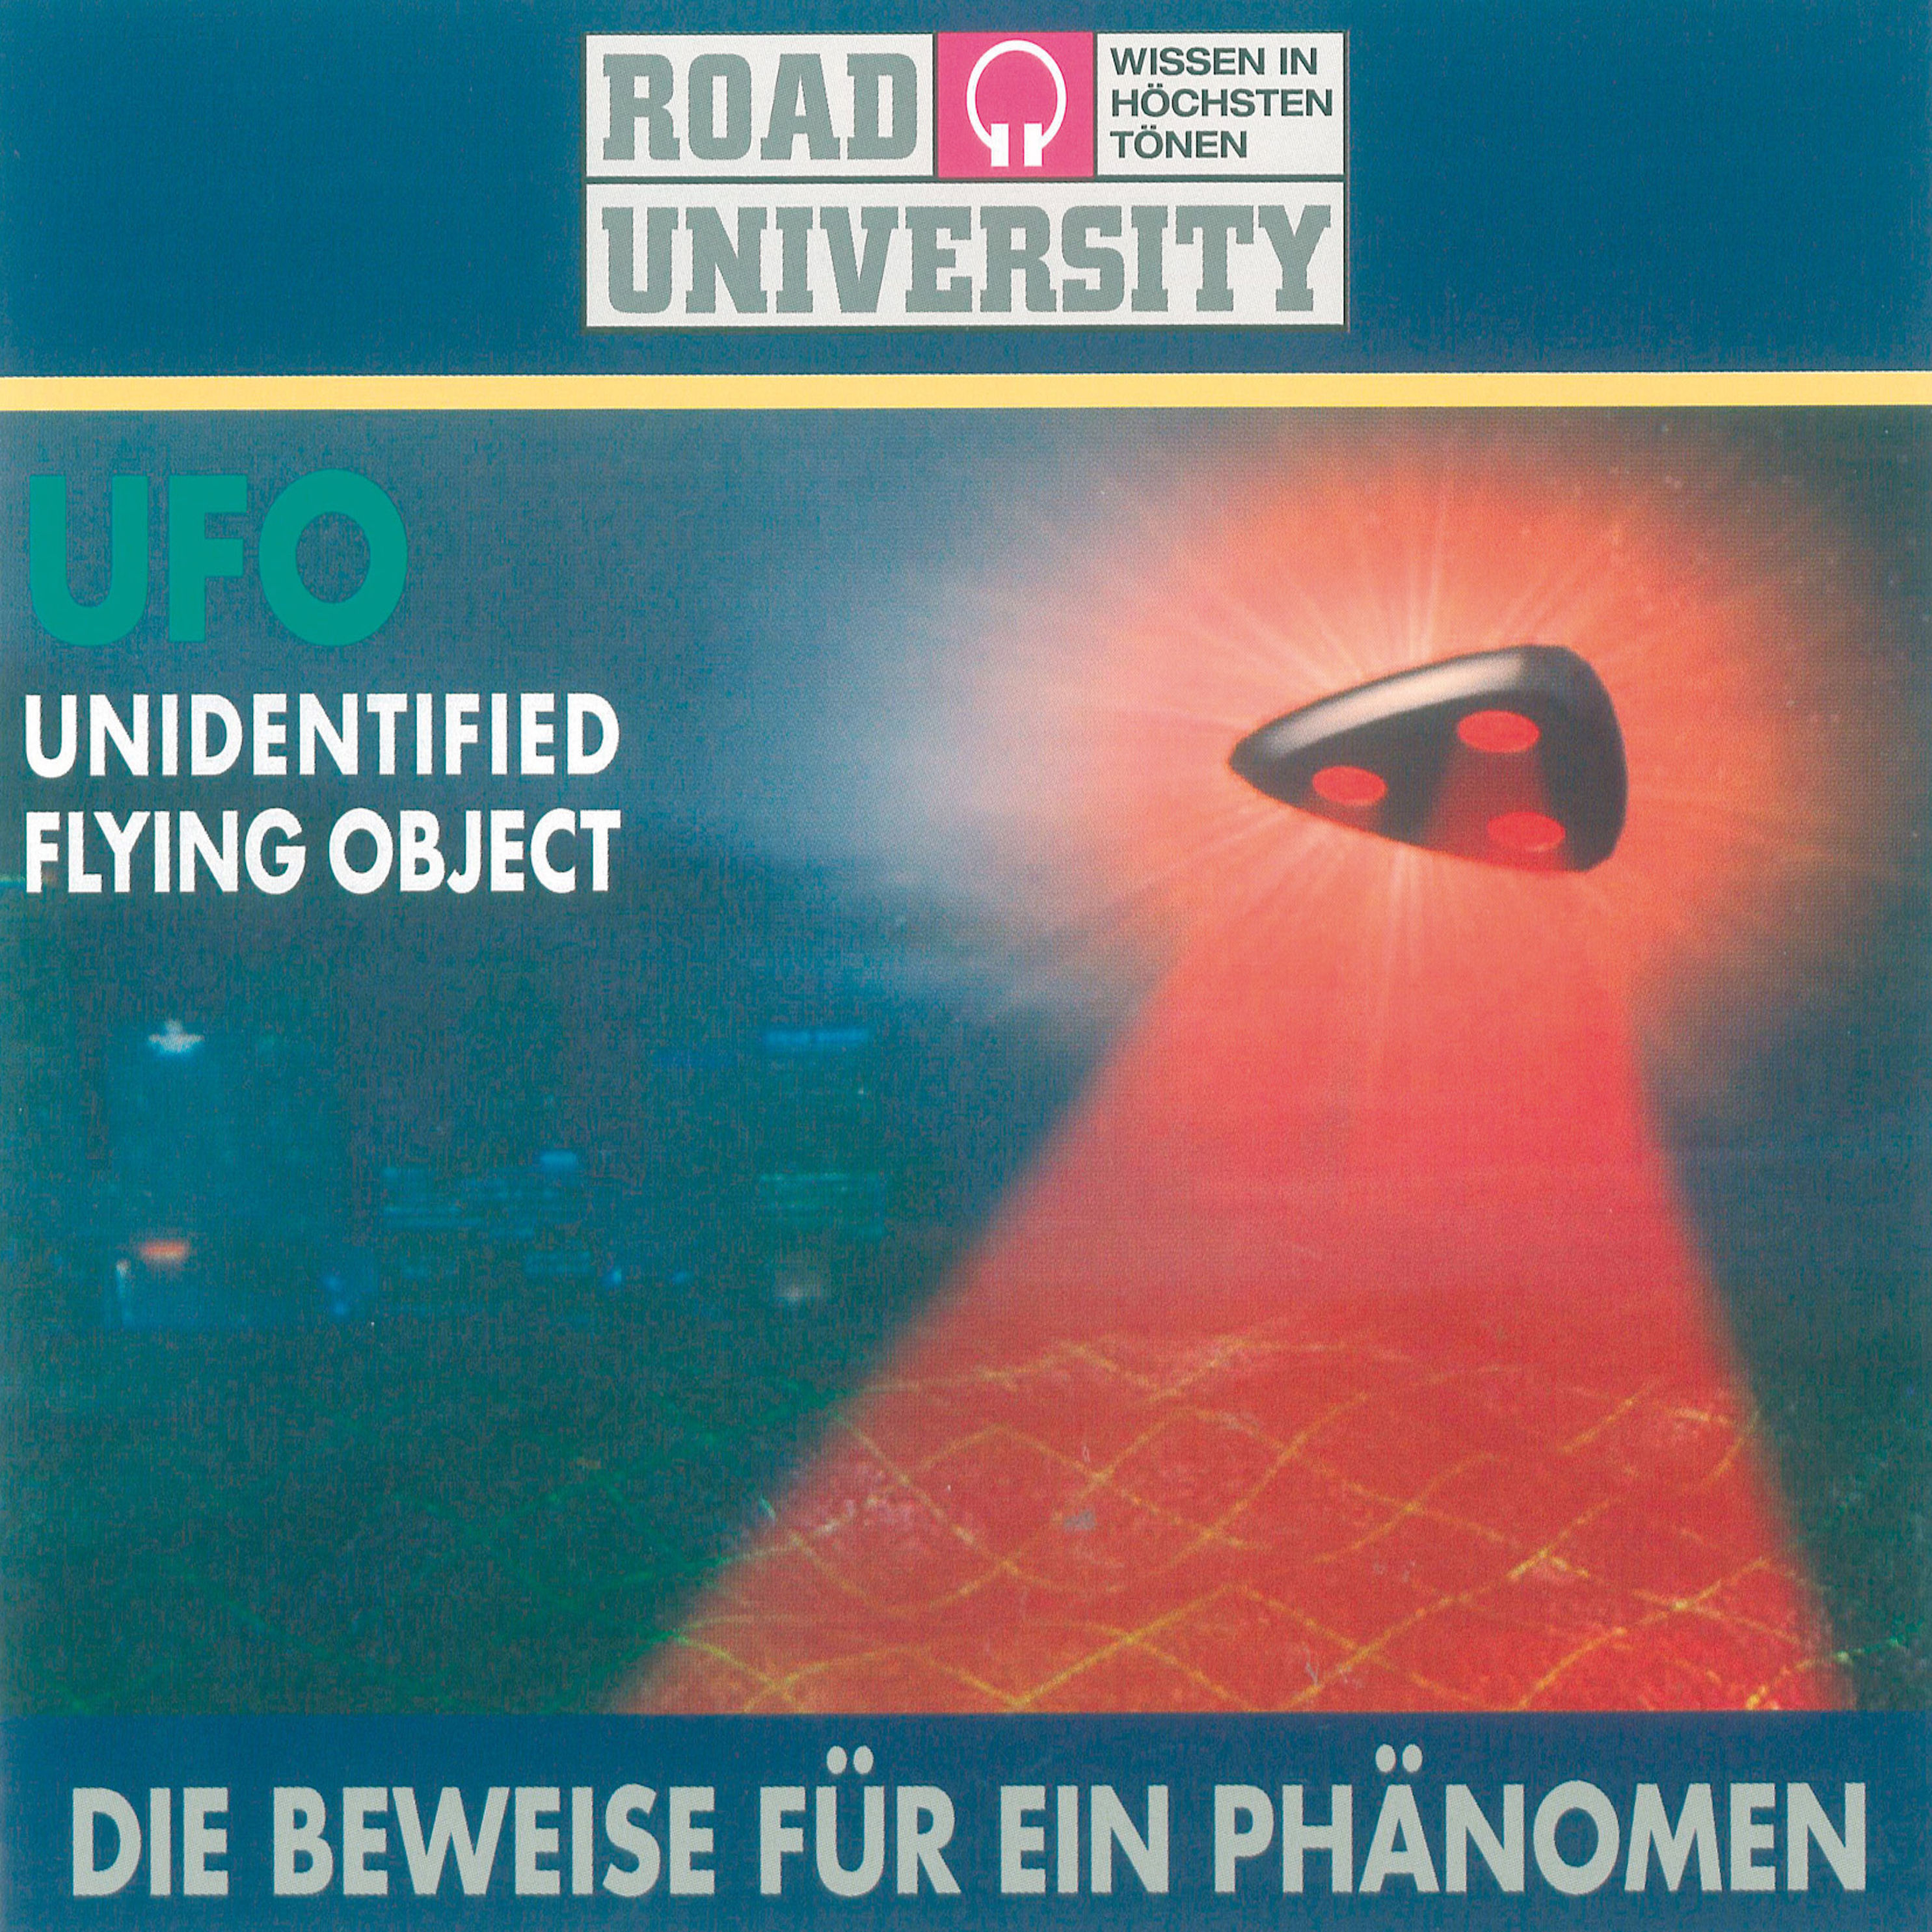 Road University - UFO Unidentified flying object Hörbuch Download